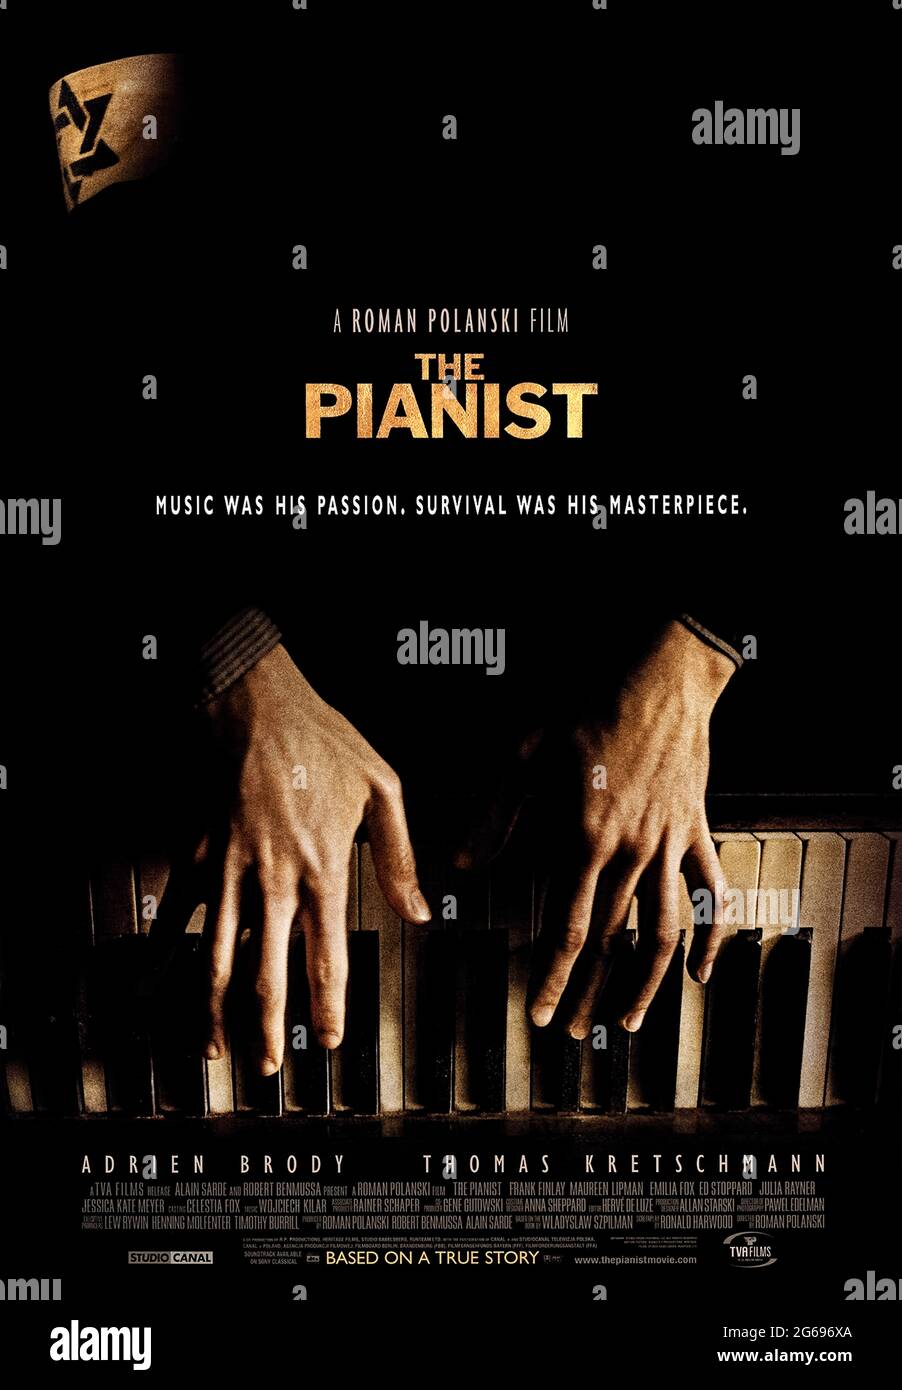 The Pianist (2002) directed by Roman Polanski and starring Adrien Brody, Thomas Kretschmann and Frank Finlay. Adaptation of Wladyslaw Szpilman autobiography about his life as a Polish Jewish musician struggling to survive the gradually destruction of the Warsaw ghetto in World War II. Stock Photo